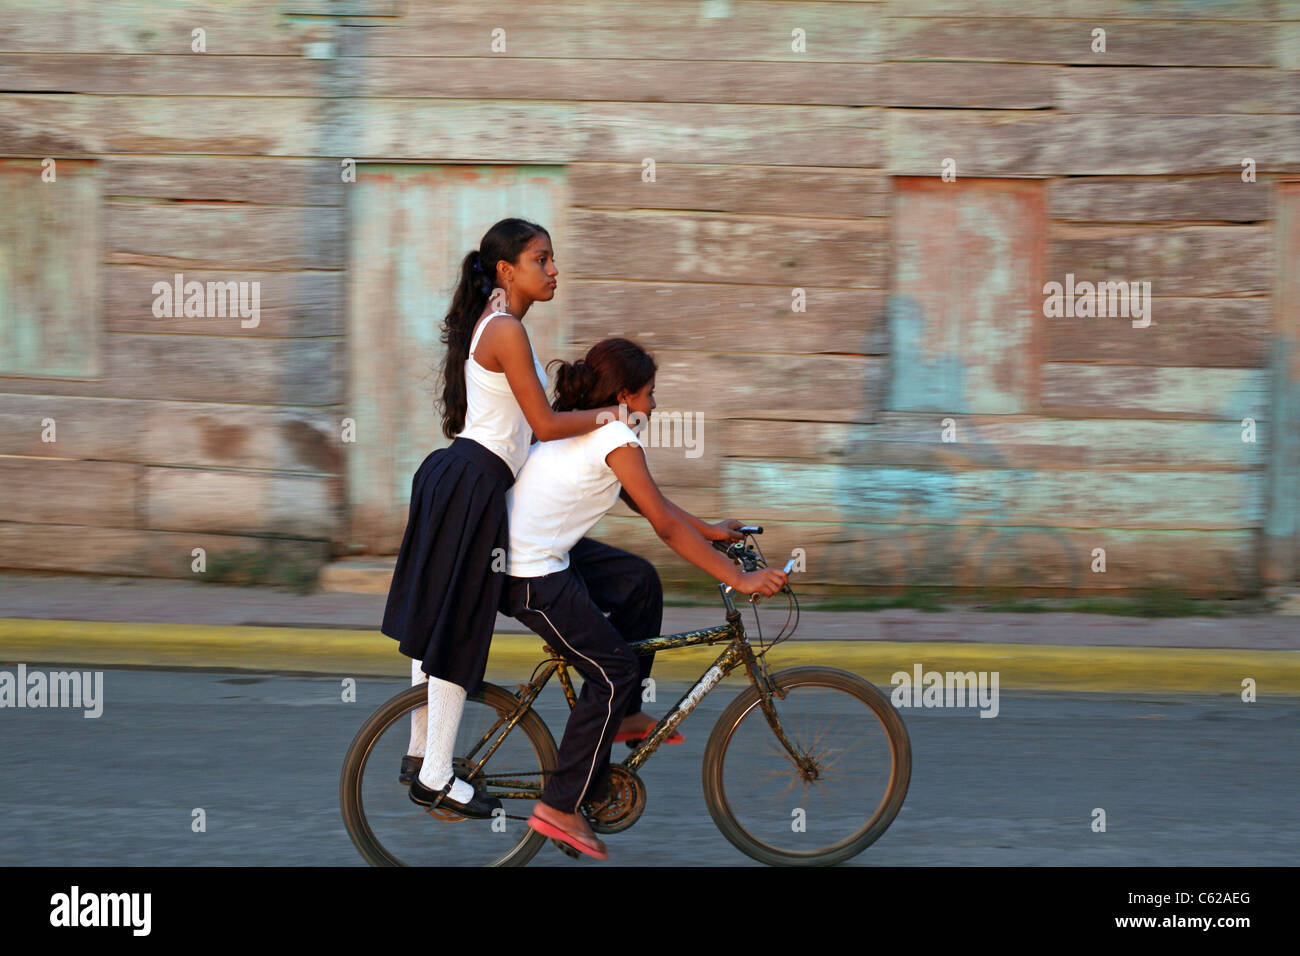 Girls riding on a bicycle. San Juan del Sur, Rivas, Nicaragua, Central America Stock Photo